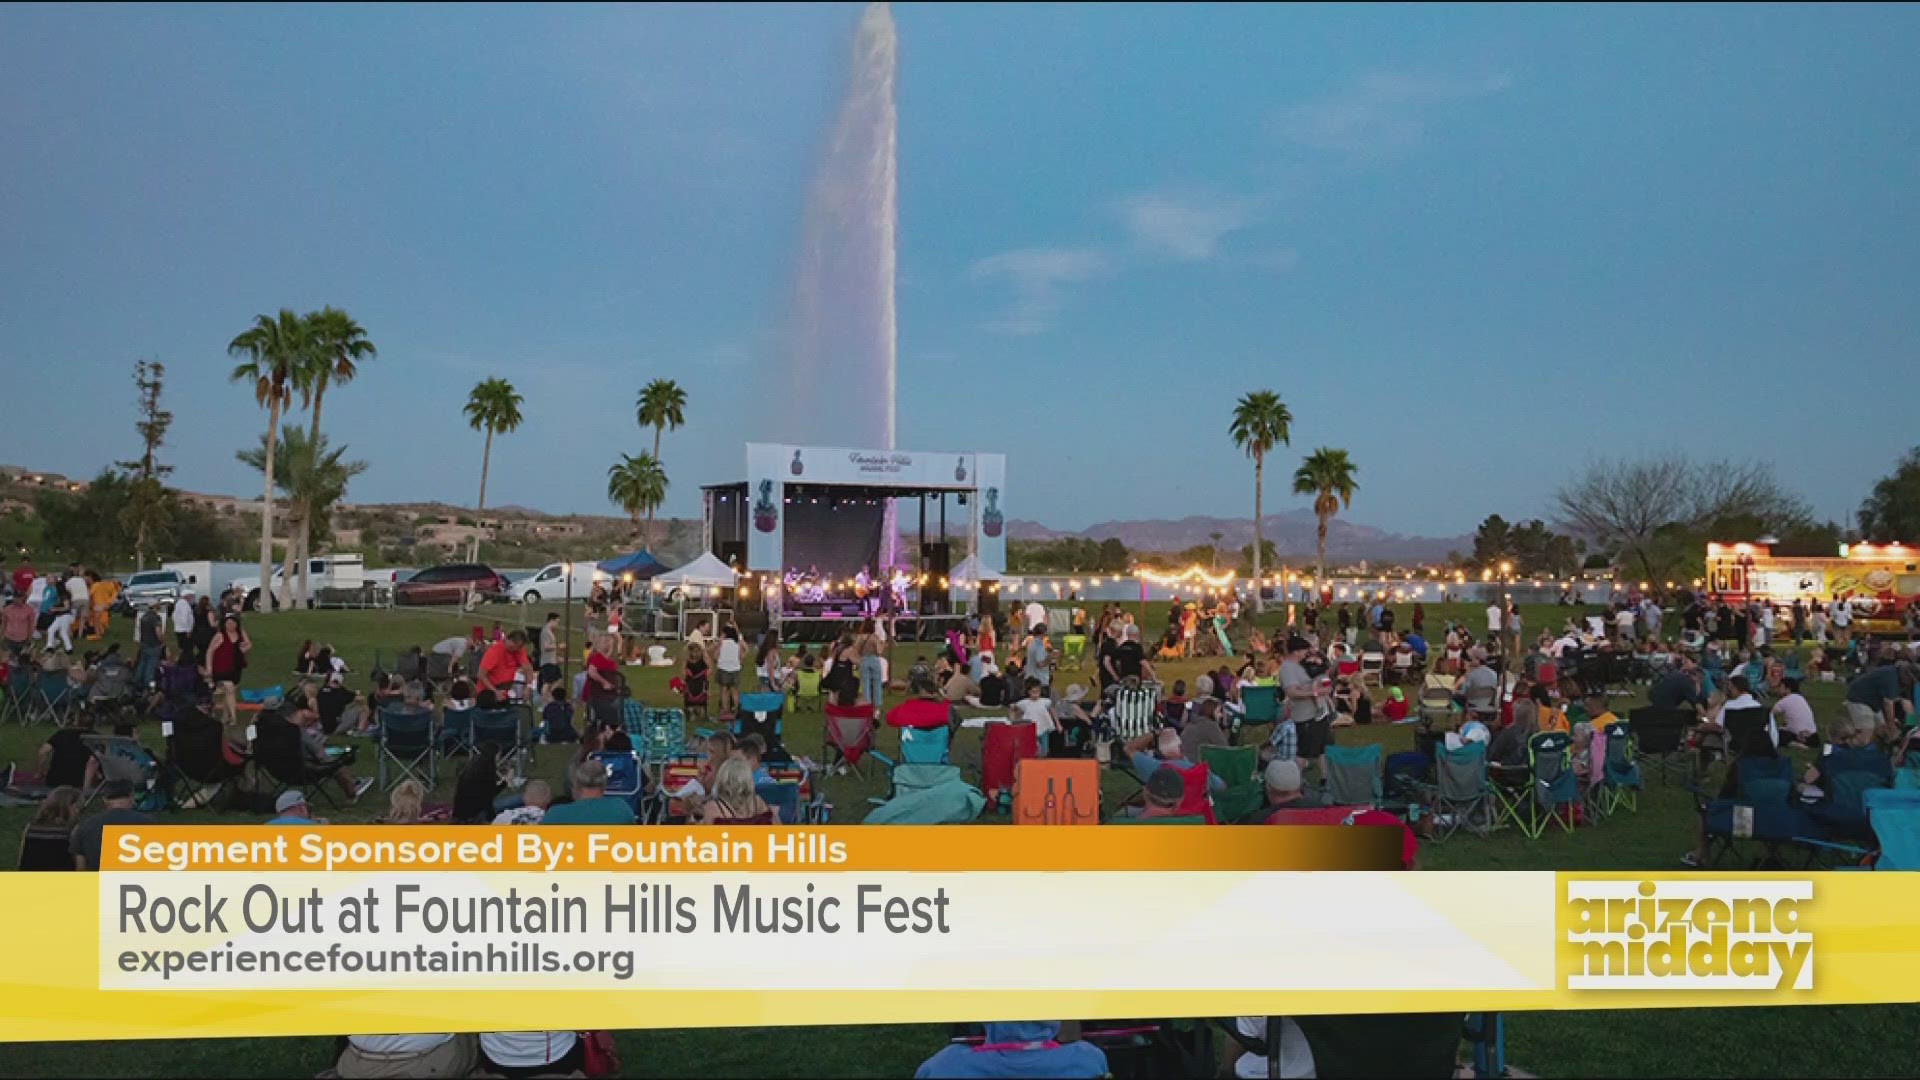 Bring your lawn chairs to enjoy live music, food and the outdoors at the annual Fountain Hills Music Festival this Saturday.